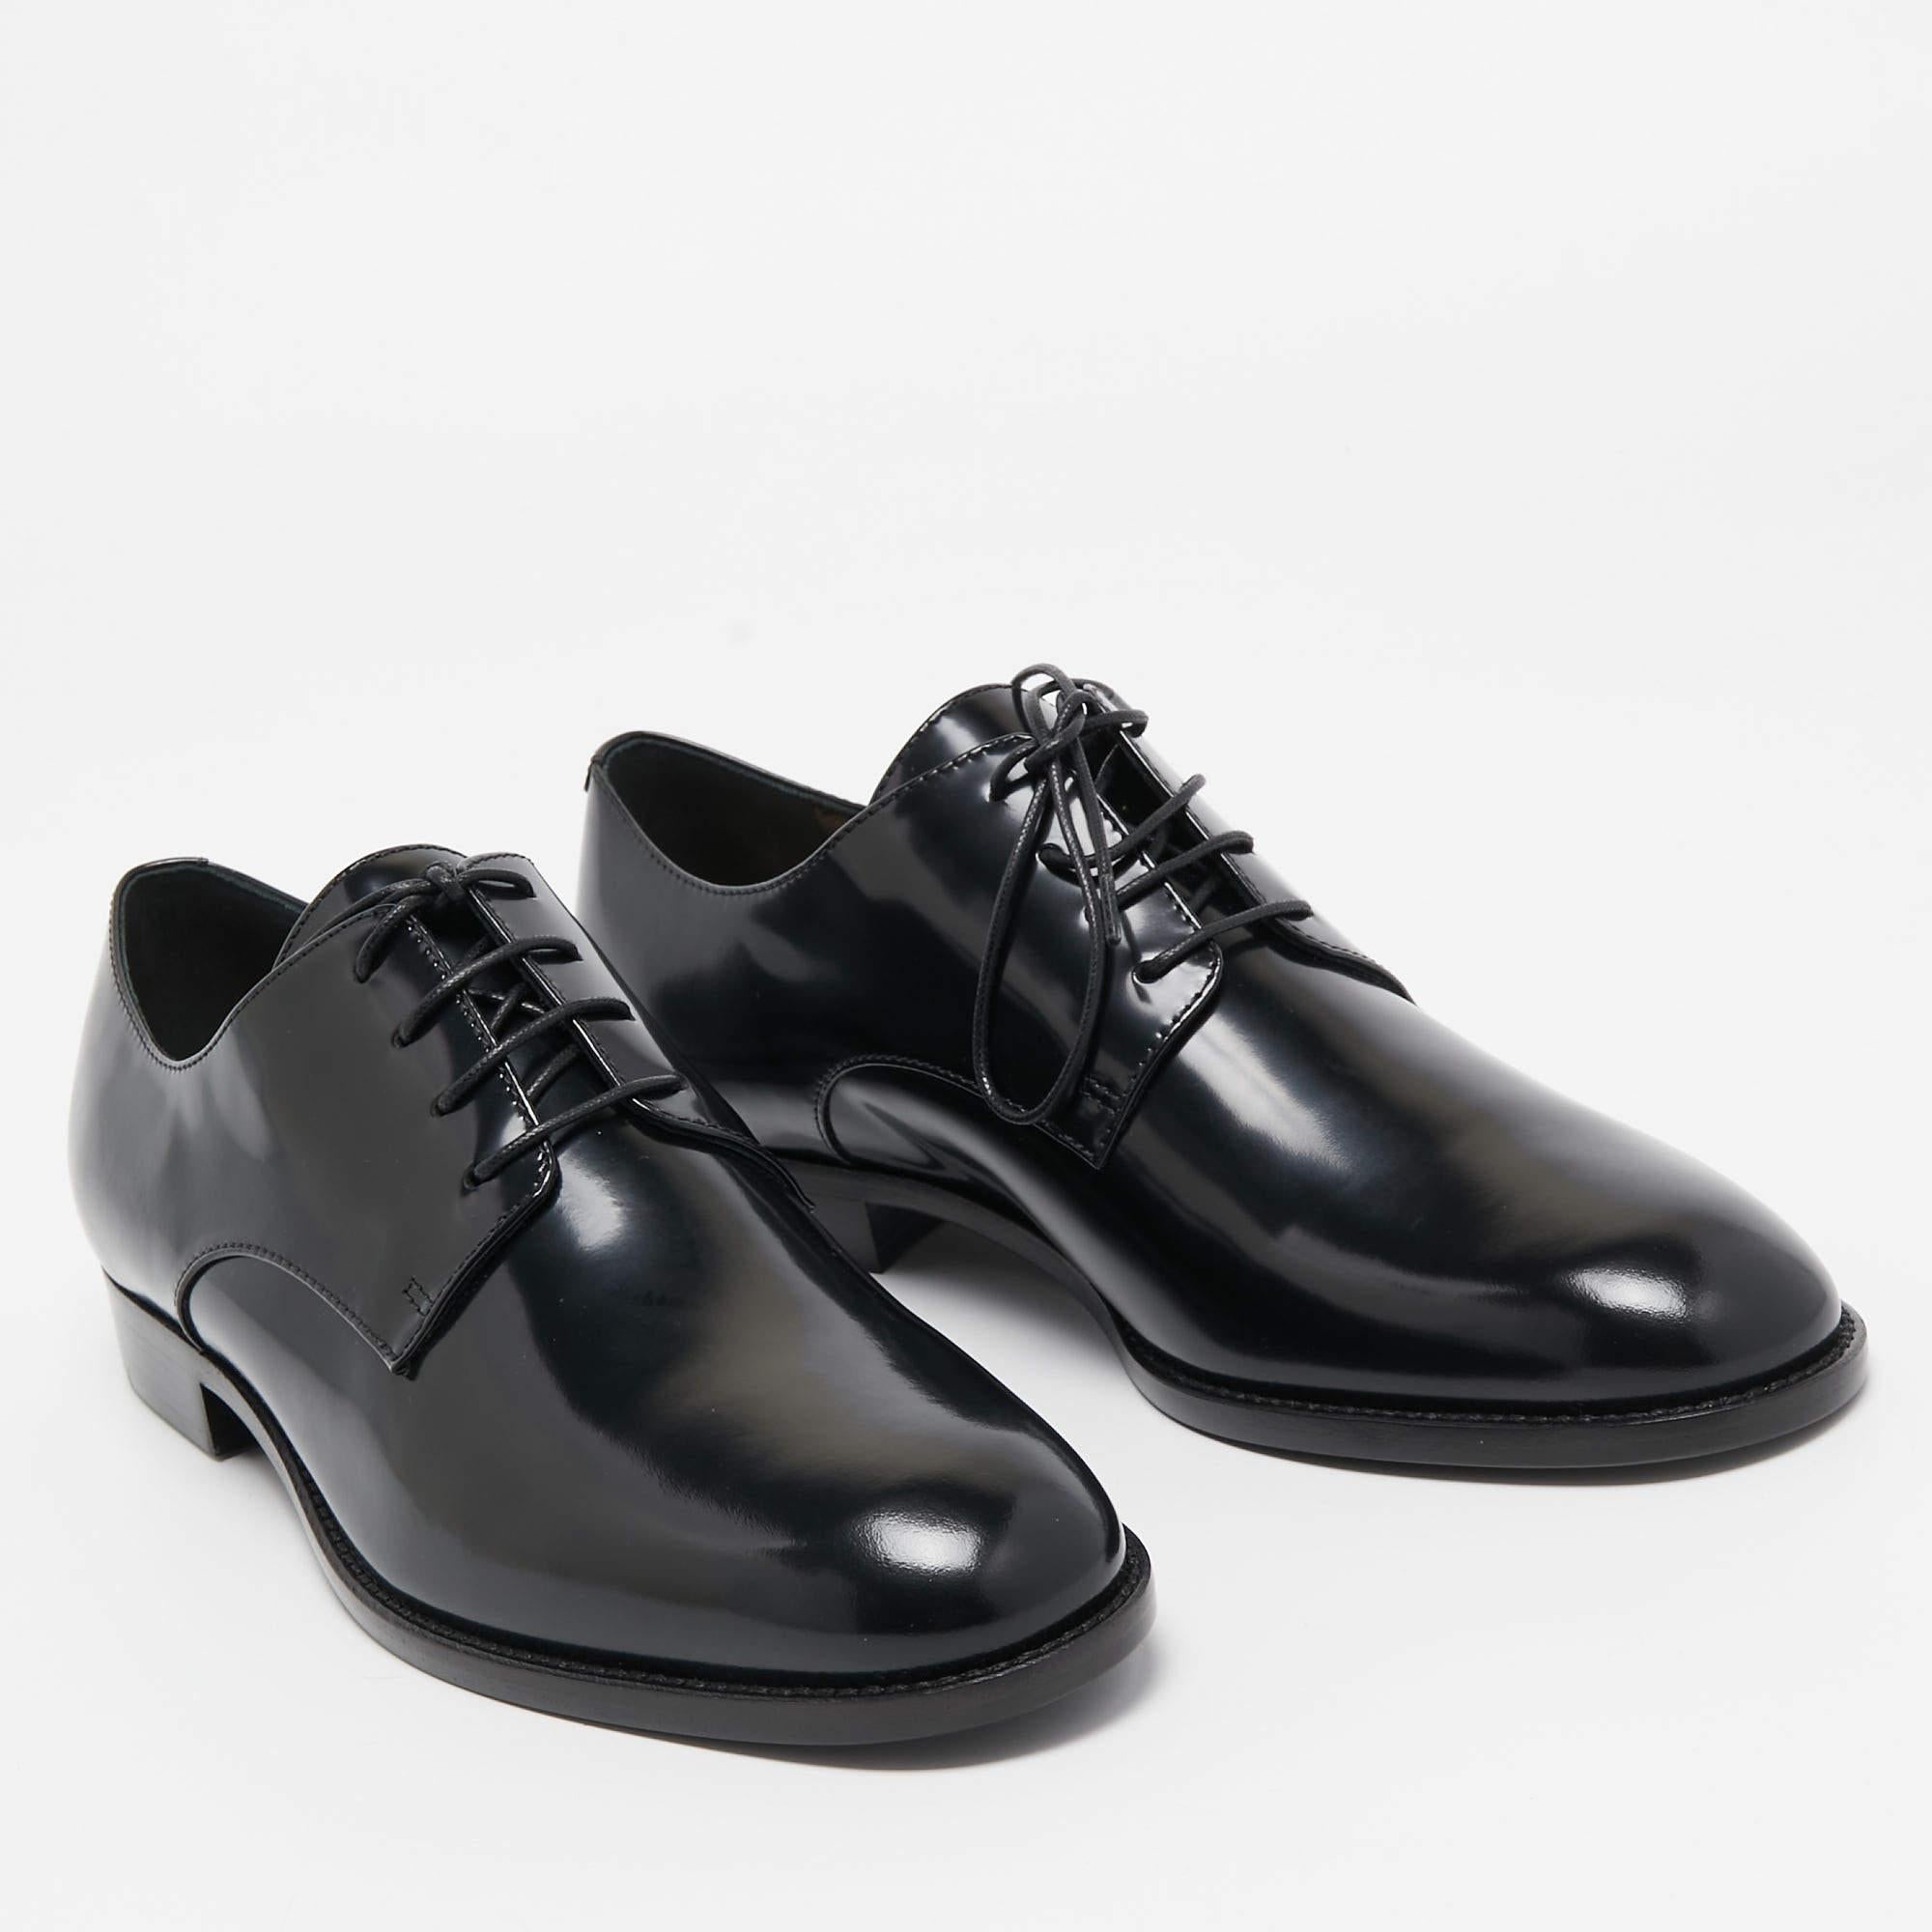 Christian Dior Black Leather Oxfords Size 37.5 2